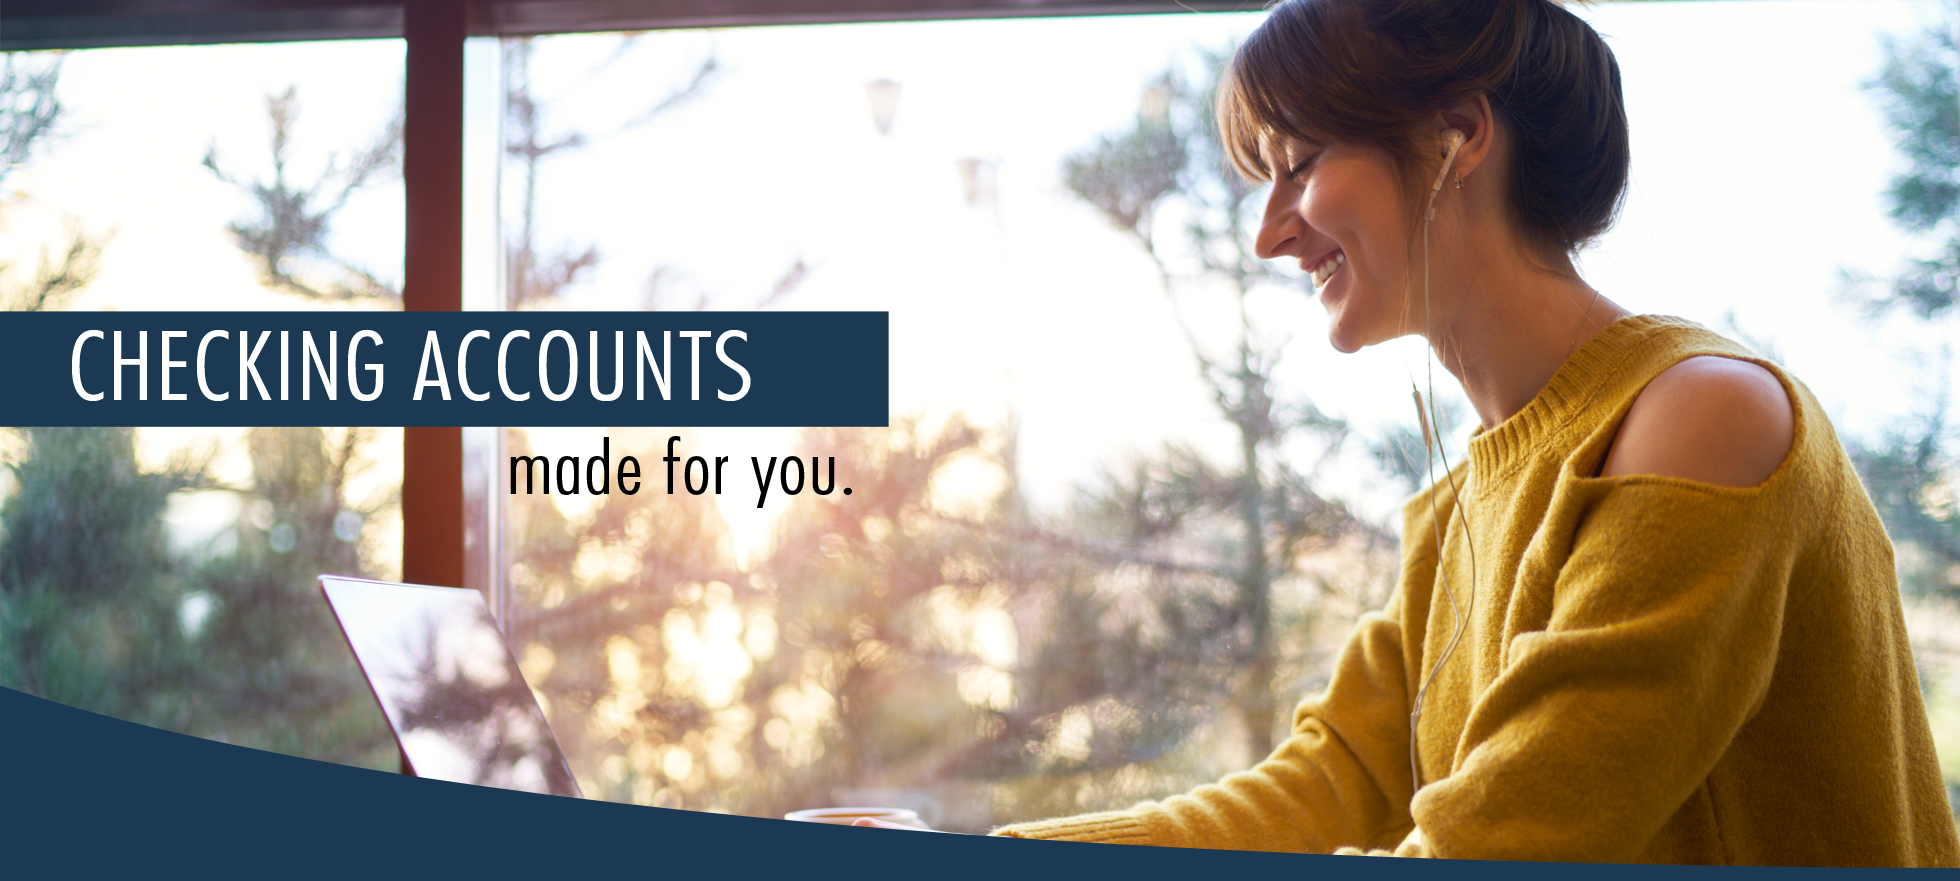 Checking accounts made for you